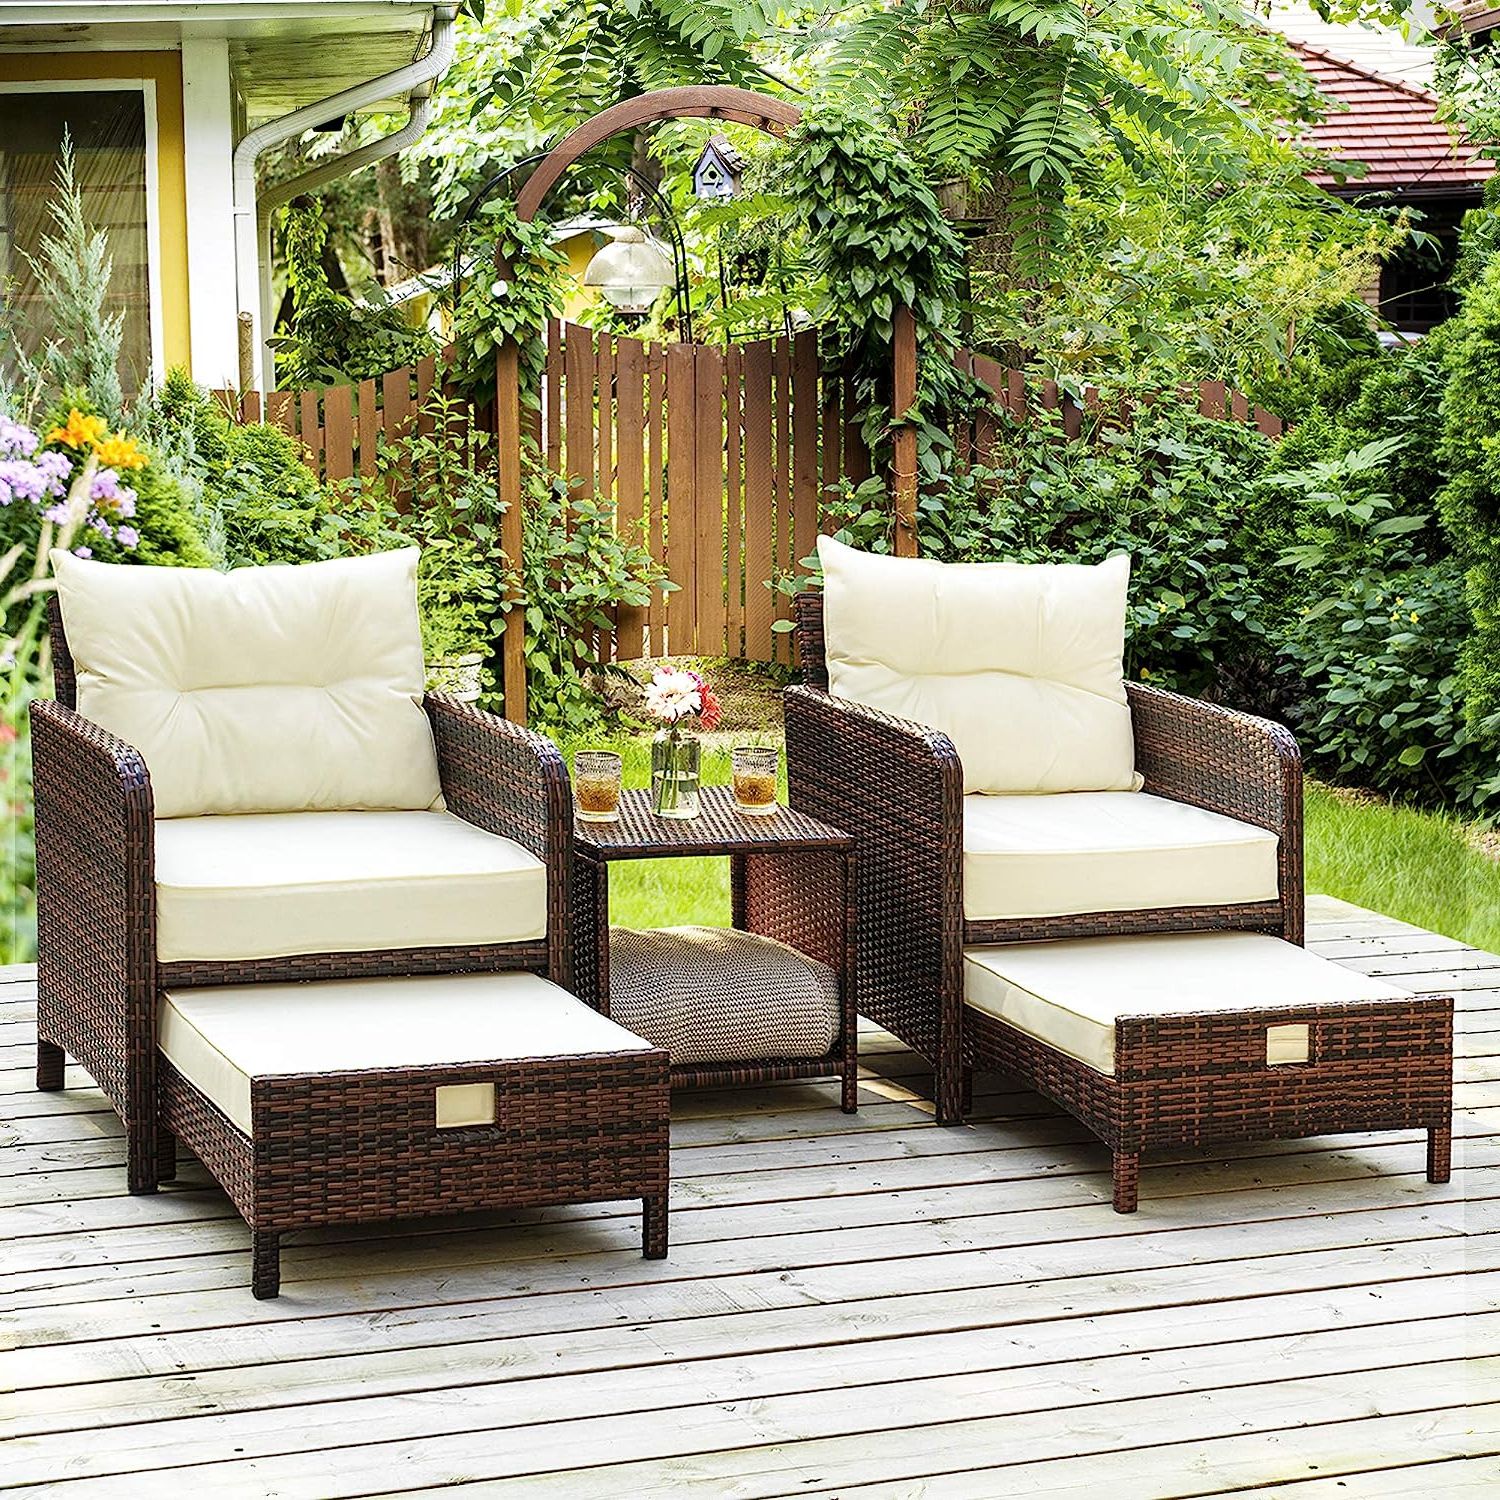 5 Piece Patio Furniture Set With Regard To Most Recent Pamapic 5 Pieces Wicker Patio Furniture Set Outdoor (View 3 of 15)